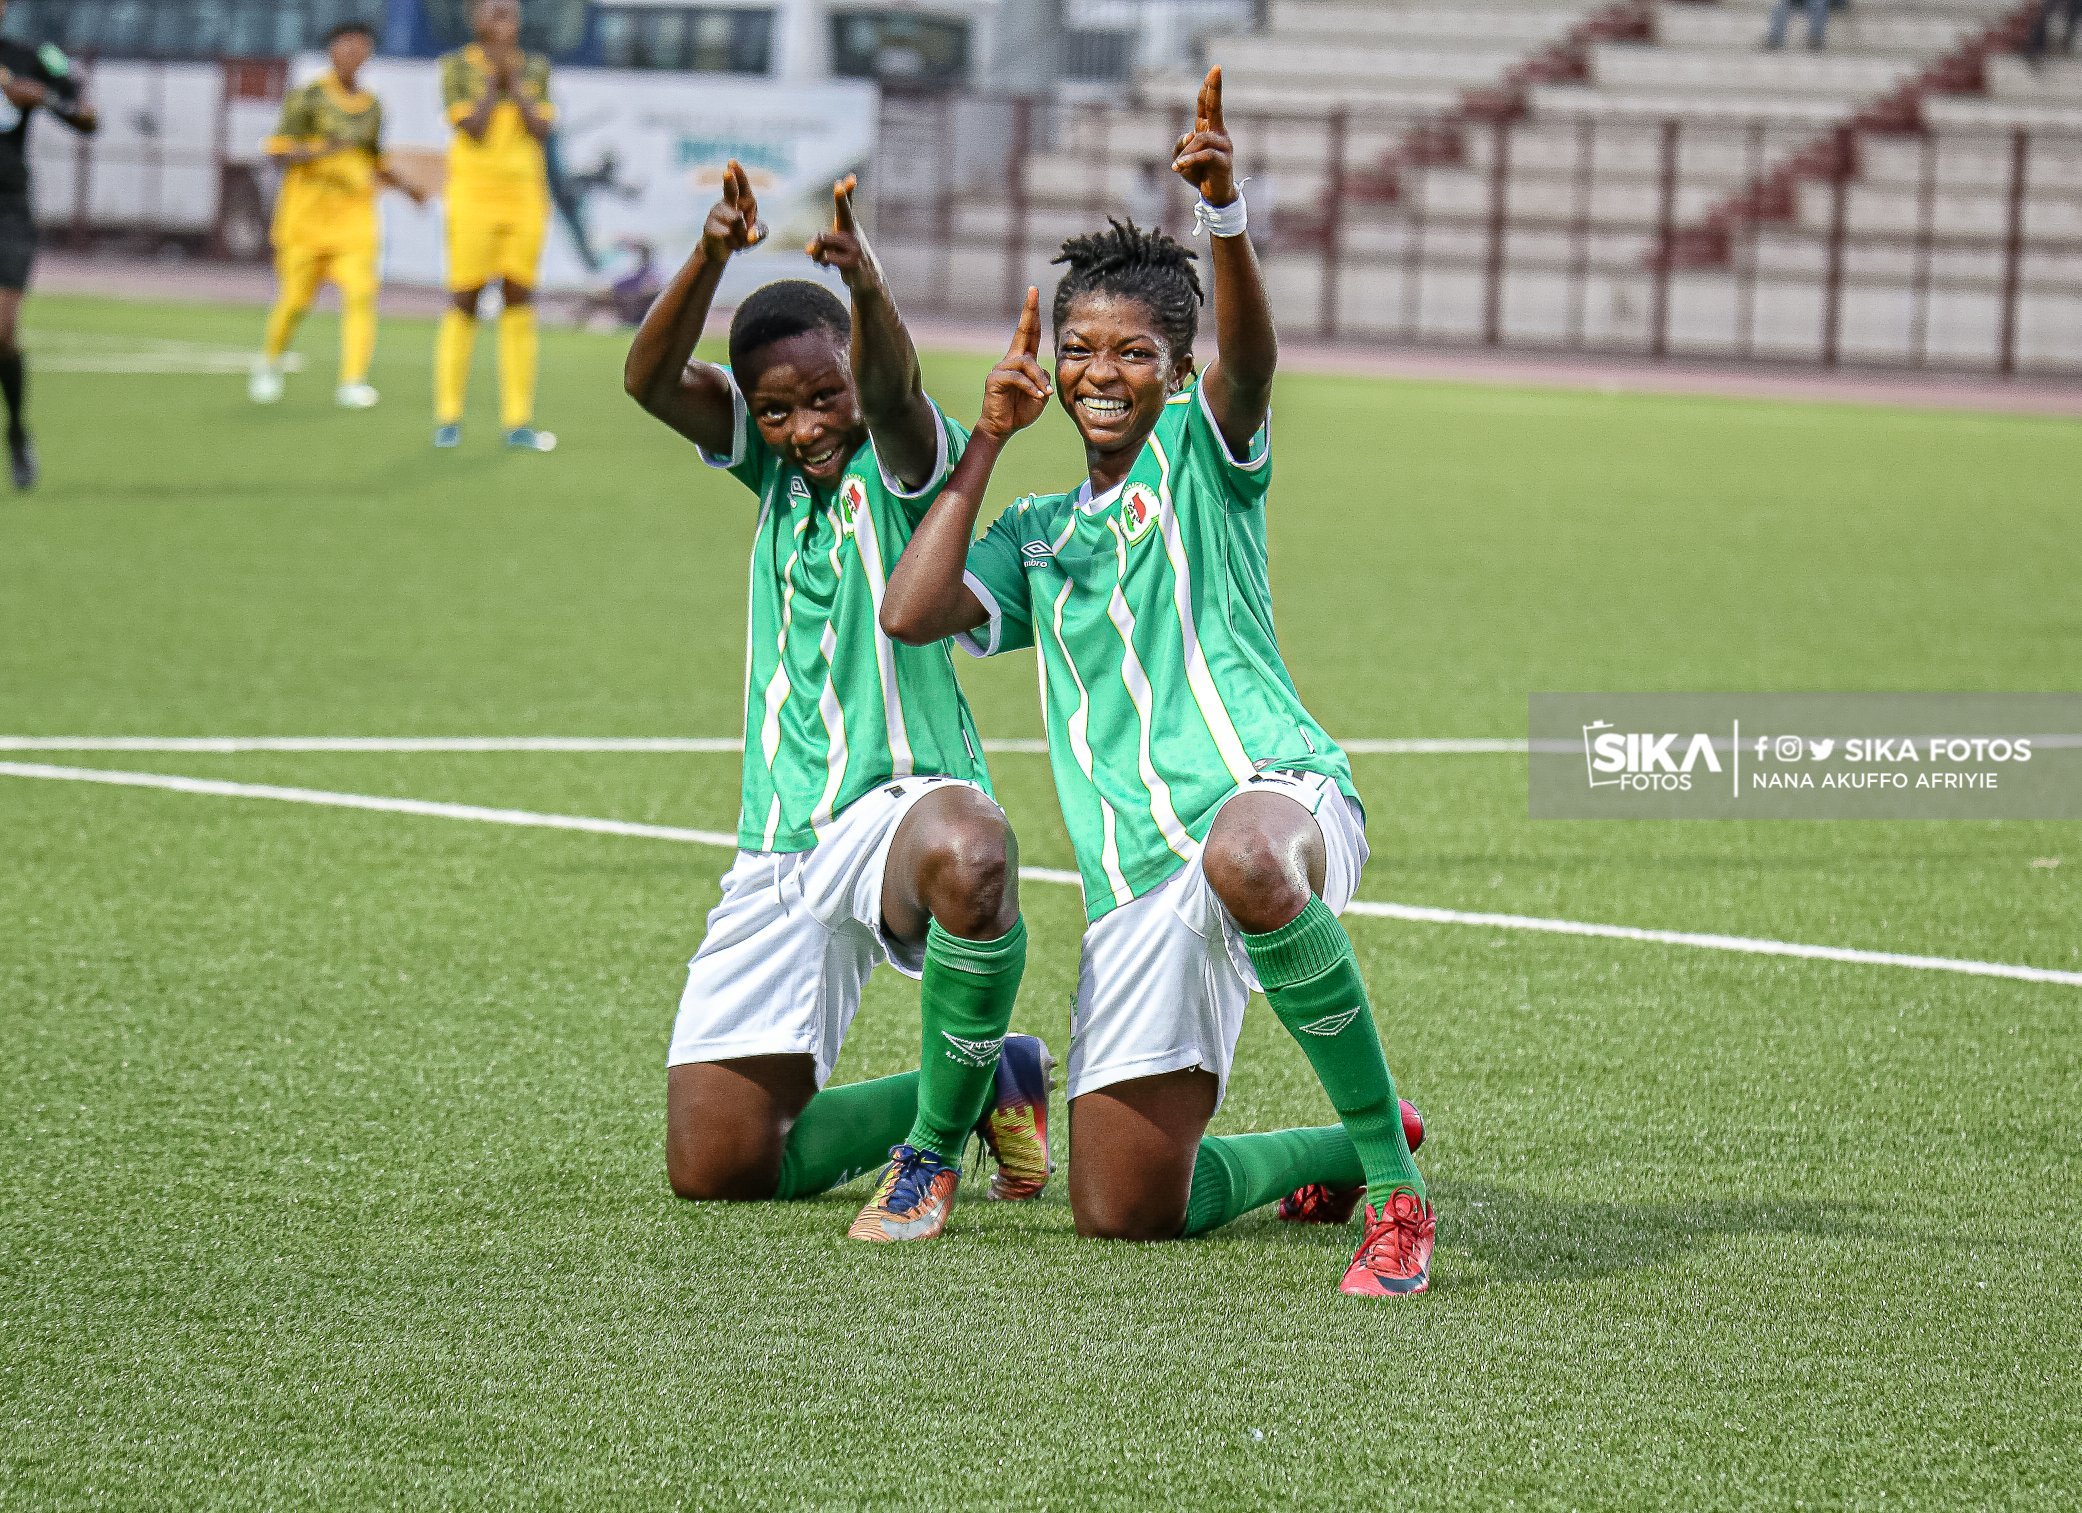 CAF Women's Champions qualifier: Milot Pokuaa scores brace to help Hasaacas Ladies seal semi-final berth with win over AS Police